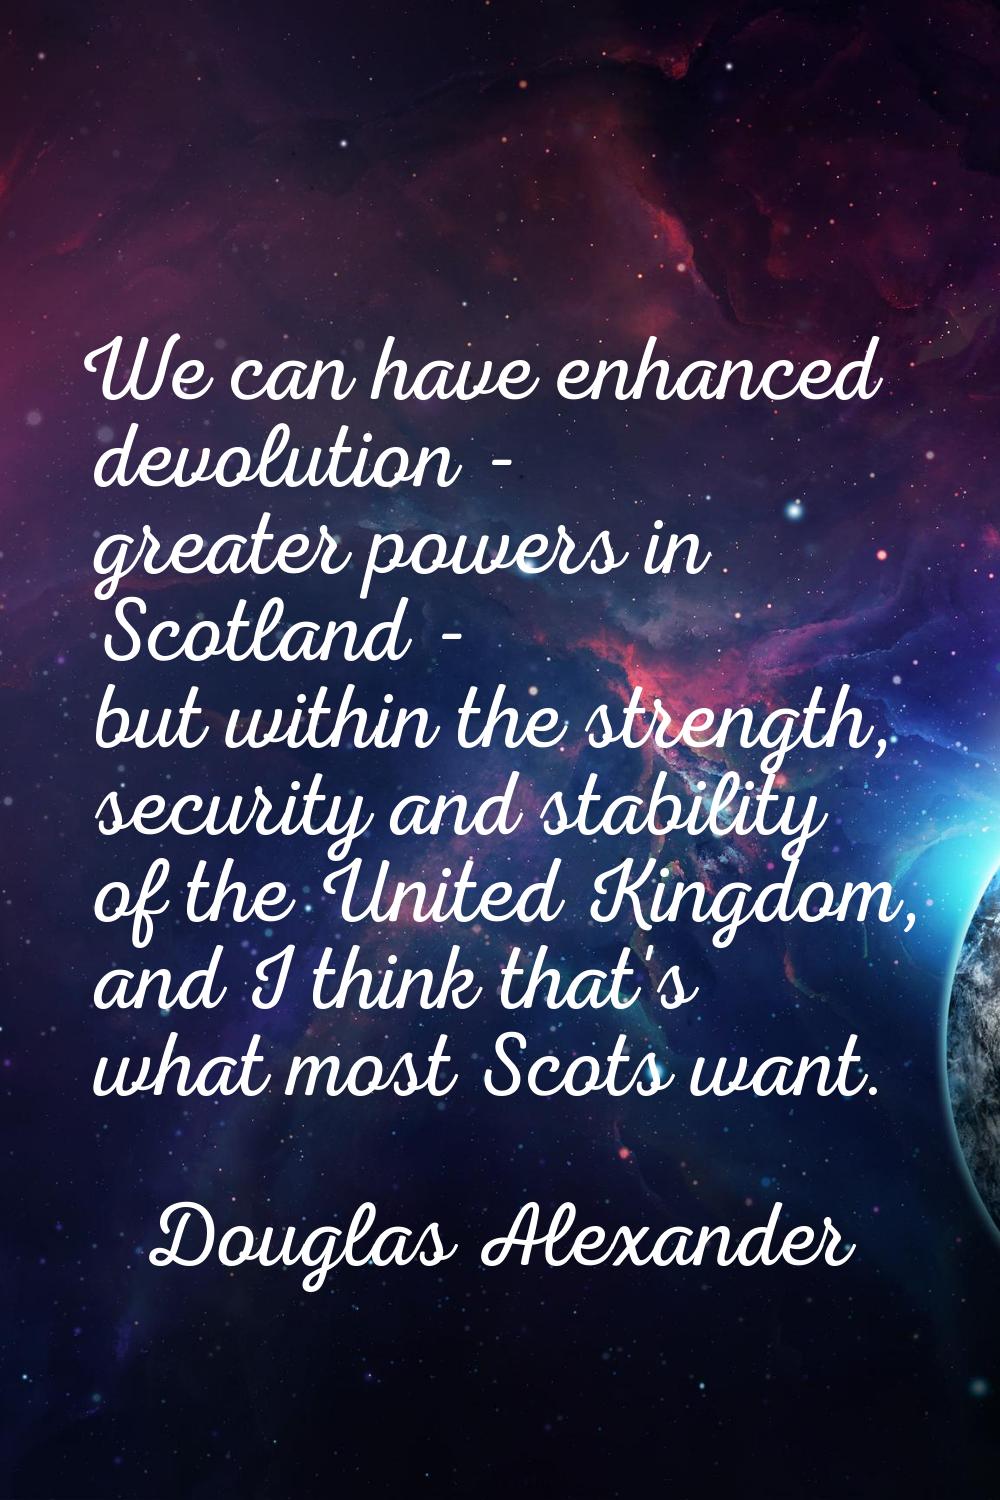 We can have enhanced devolution - greater powers in Scotland - but within the strength, security an